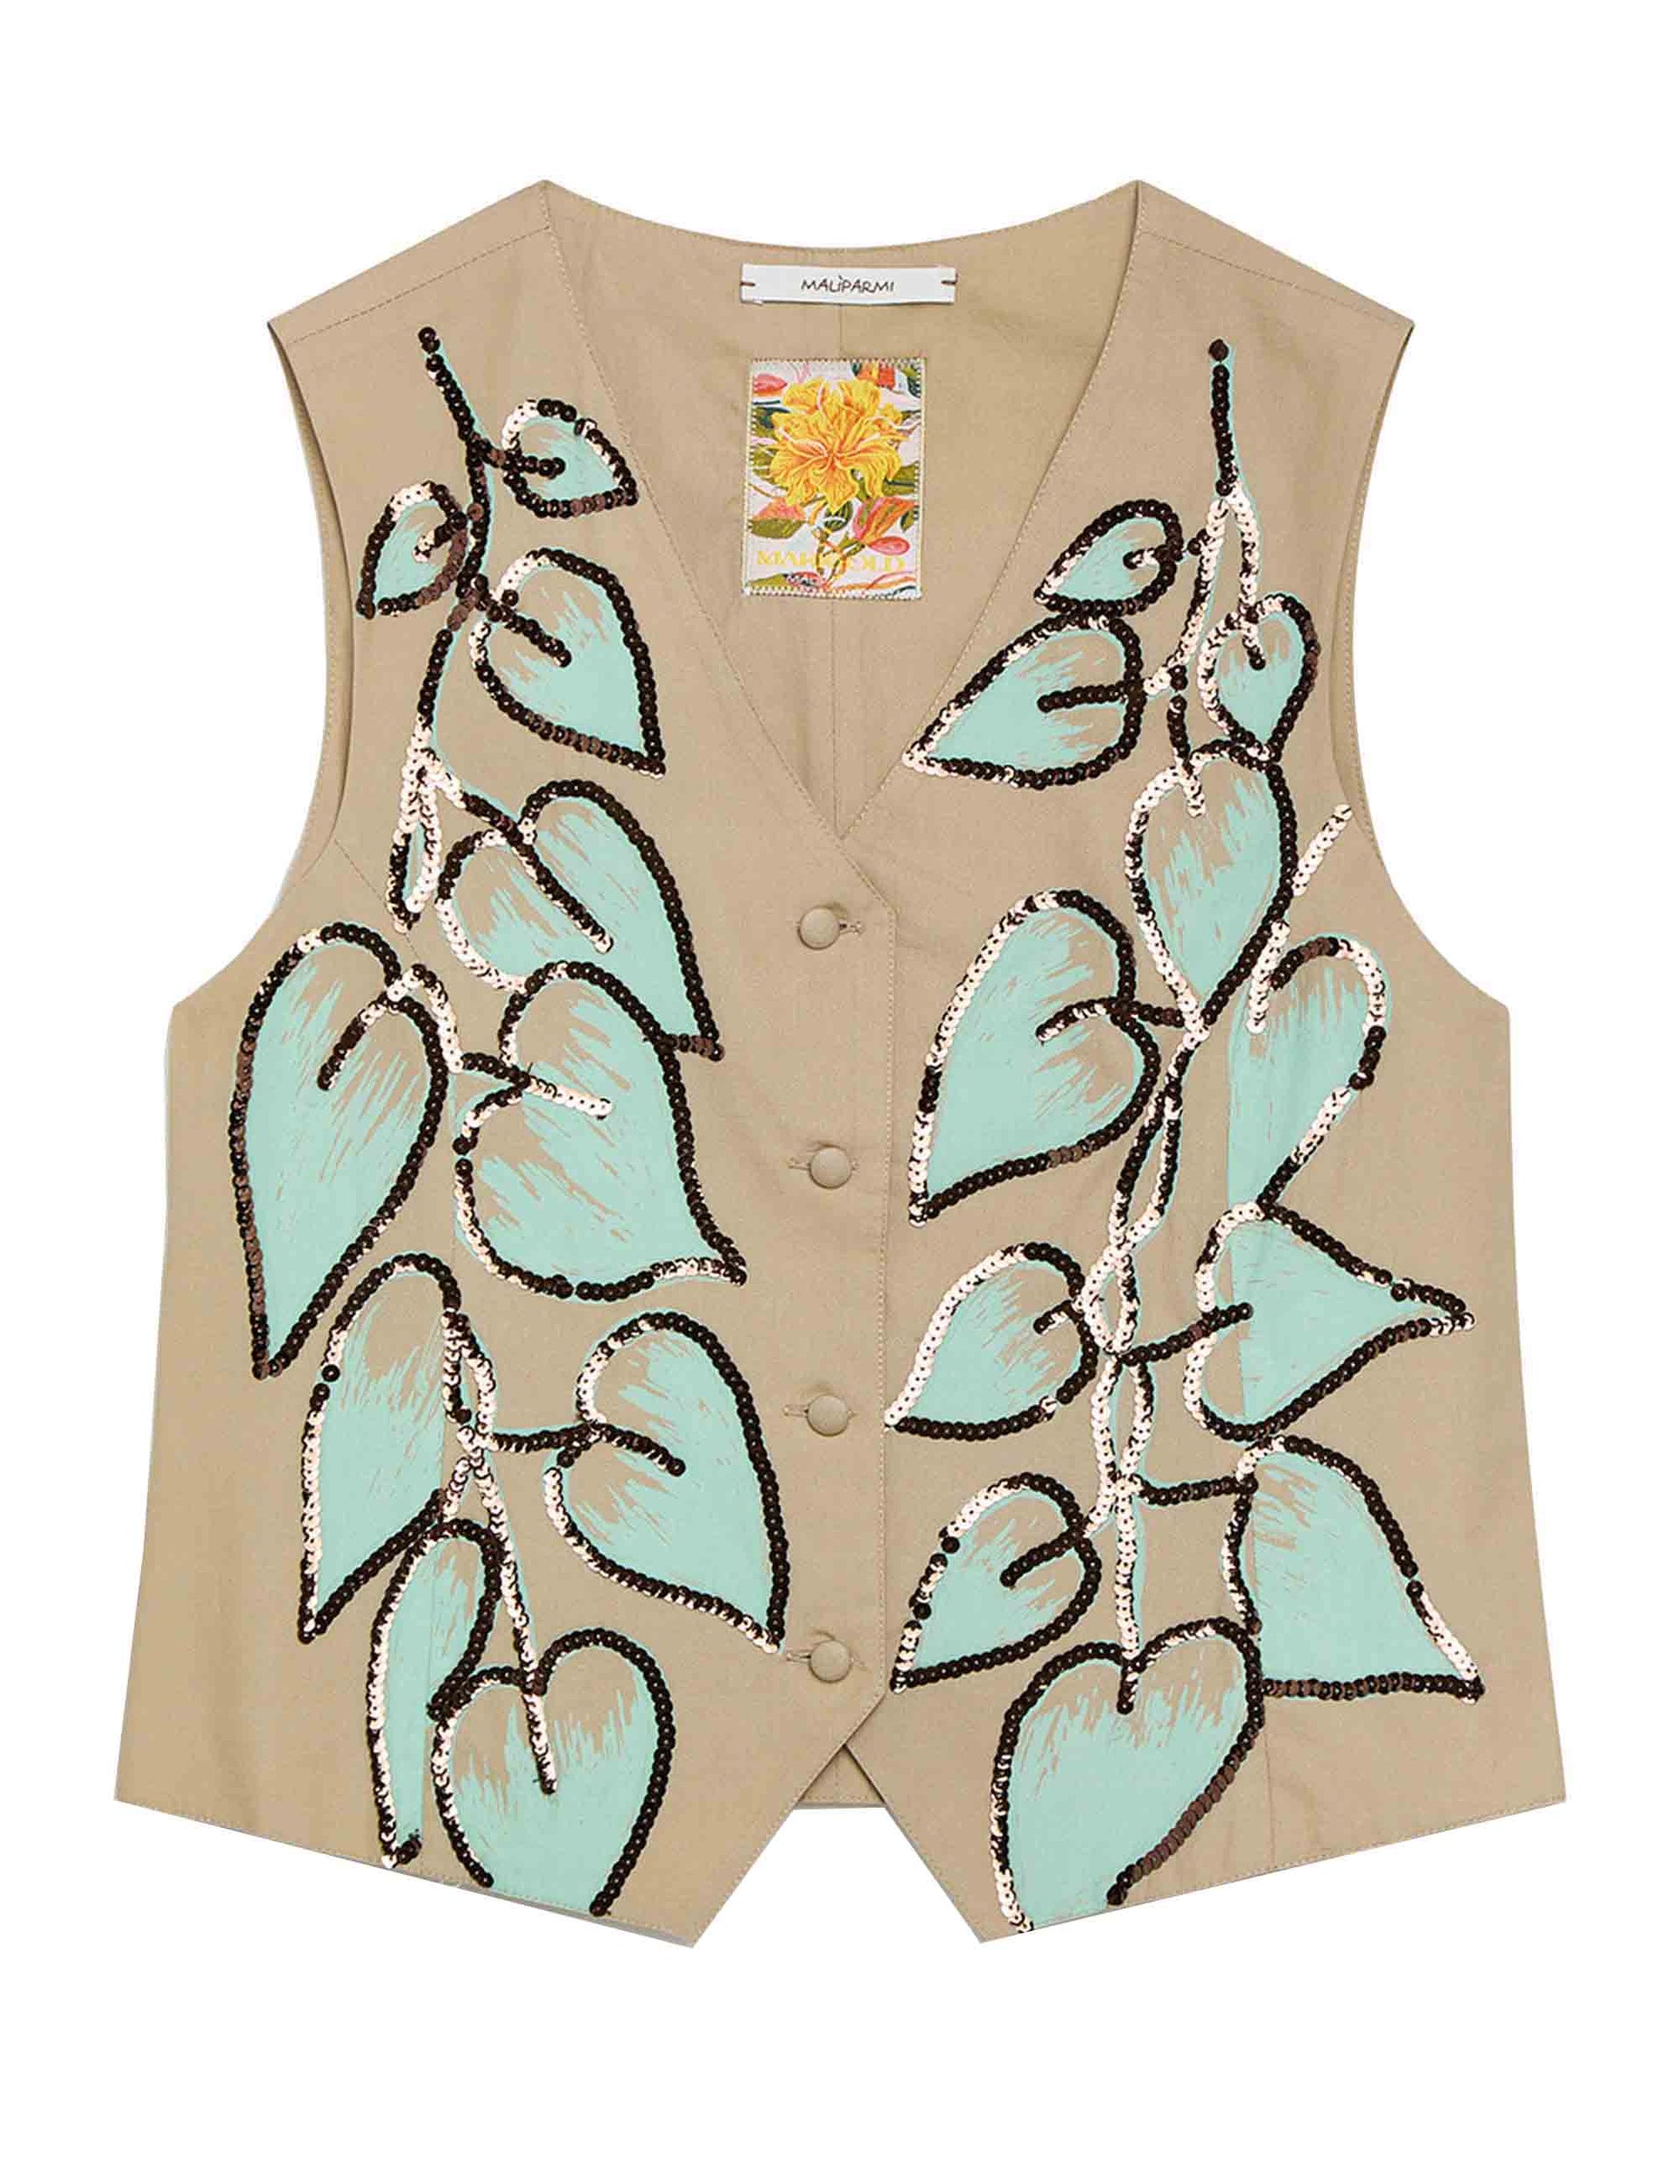 Gilet donna Archive Leaf Embroidery in cotone beige e verde